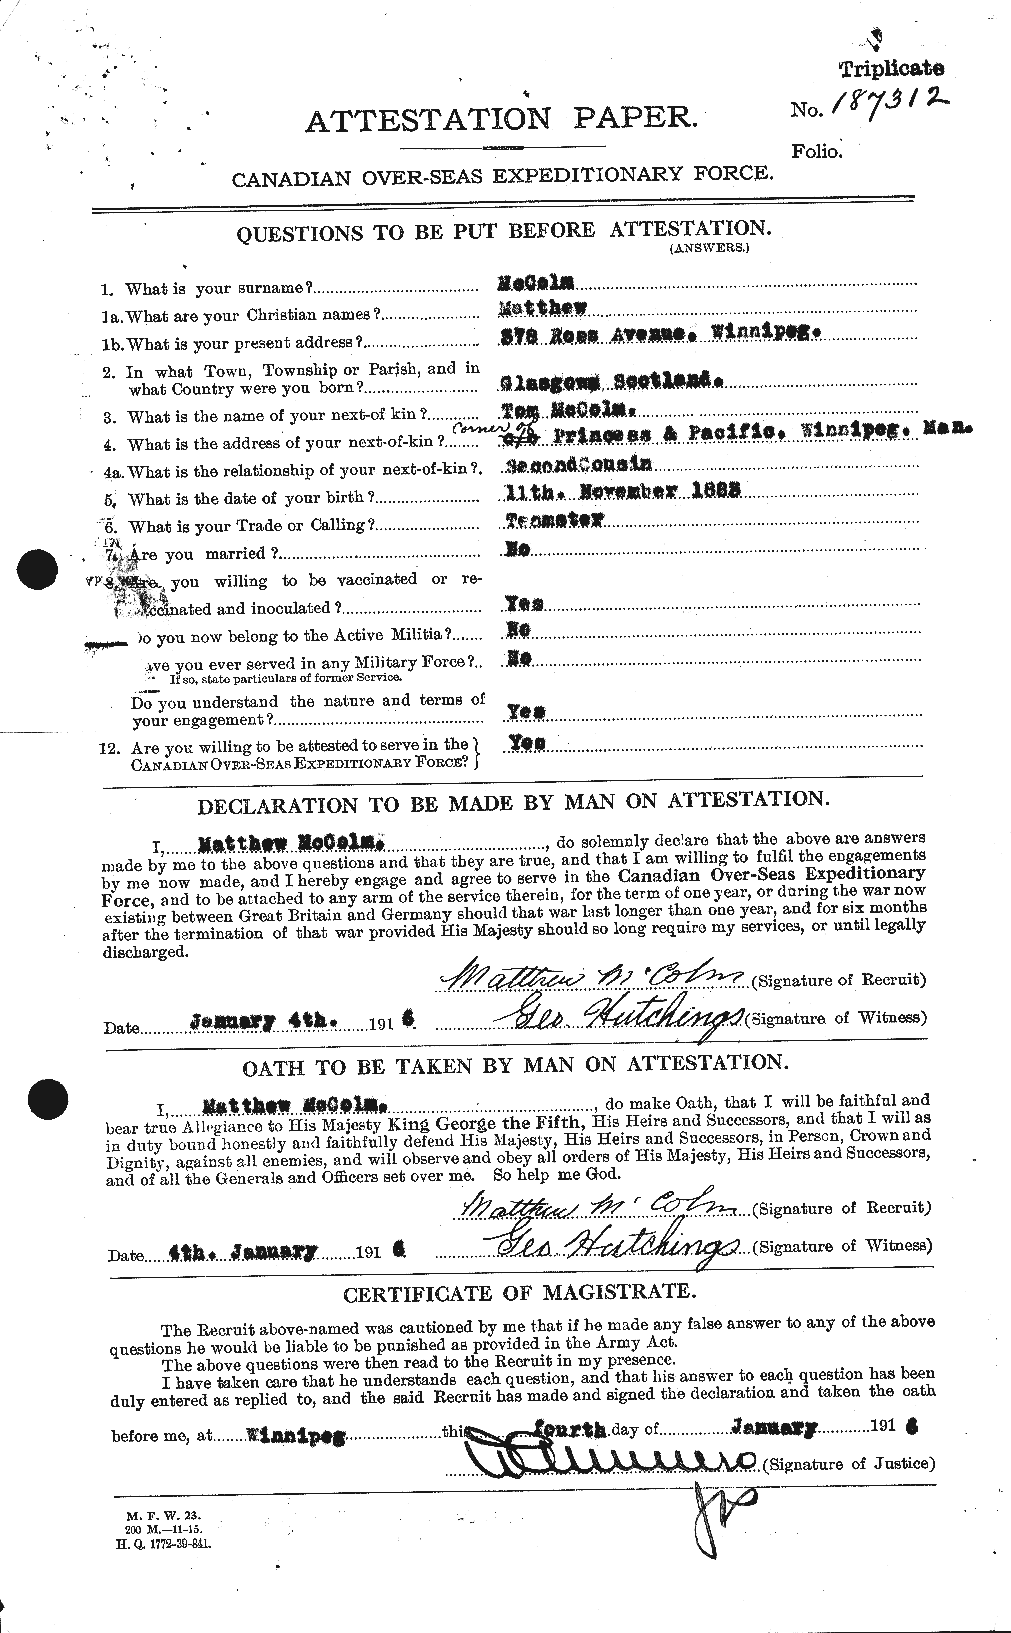 Personnel Records of the First World War - CEF 133326a